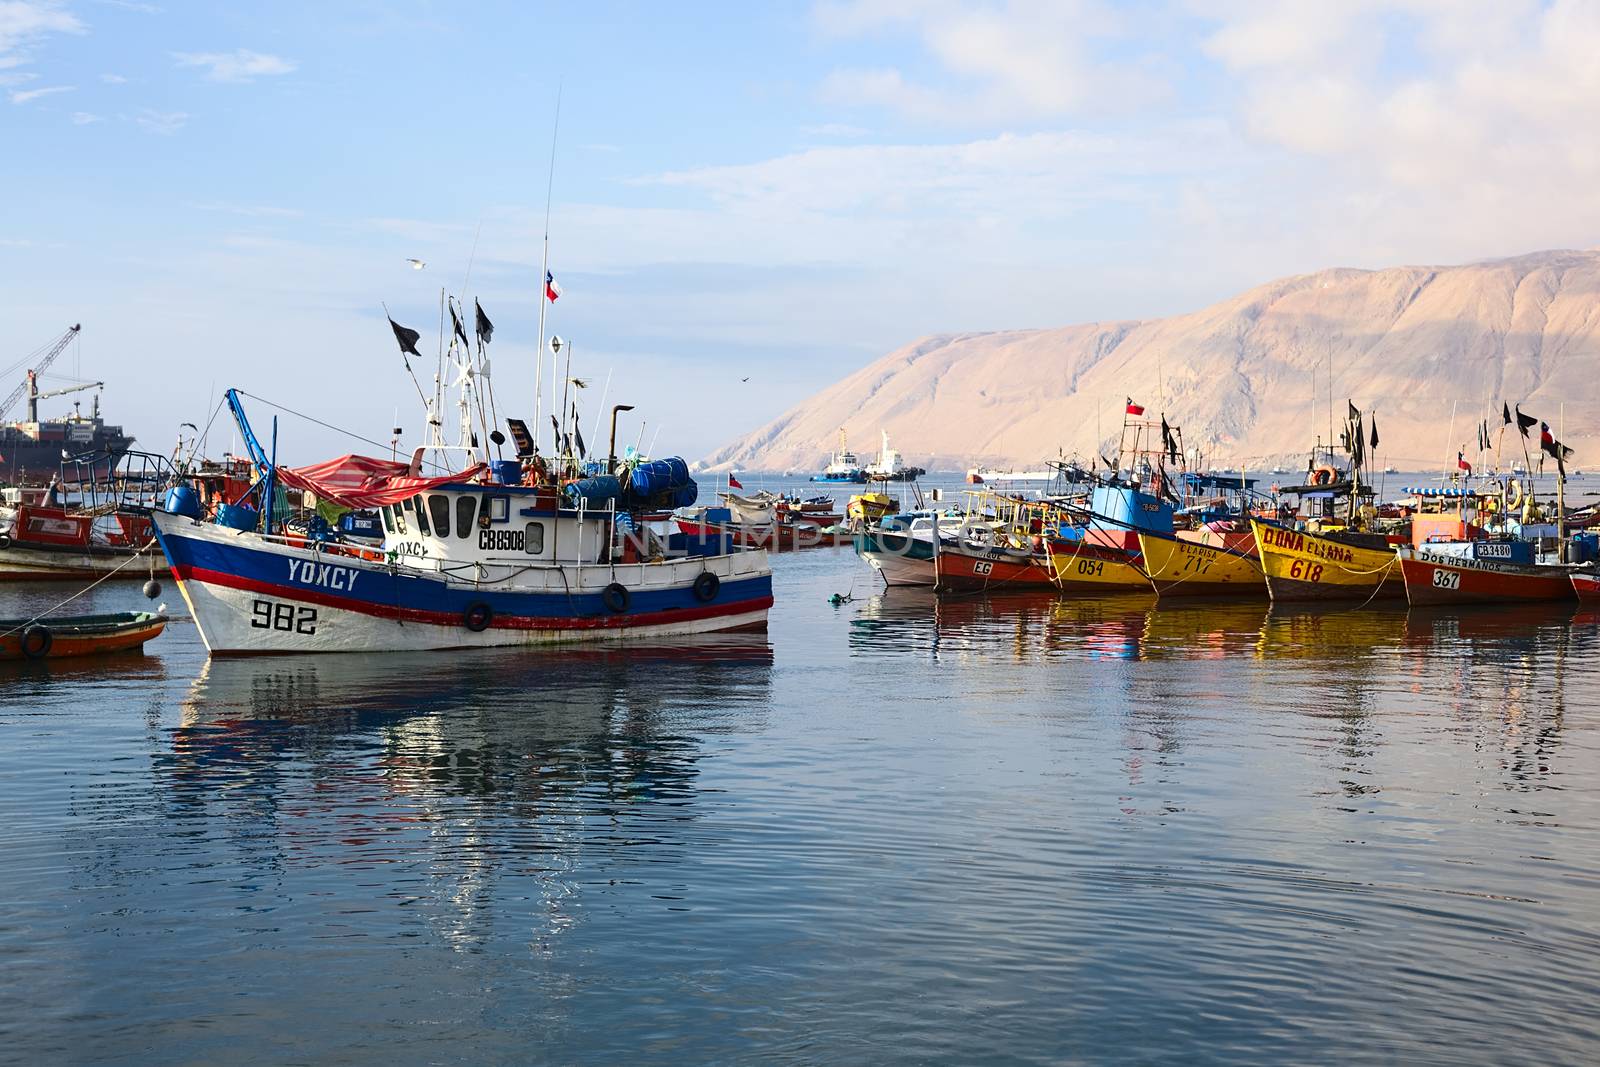 IQUIQUE, CHILE - JANUARY 22, 2015: Fishing boats anchoring in the port of Iquique on January 22, 2015 in Iquique, Chile. Iquique is an important port city in Northern Chile. 